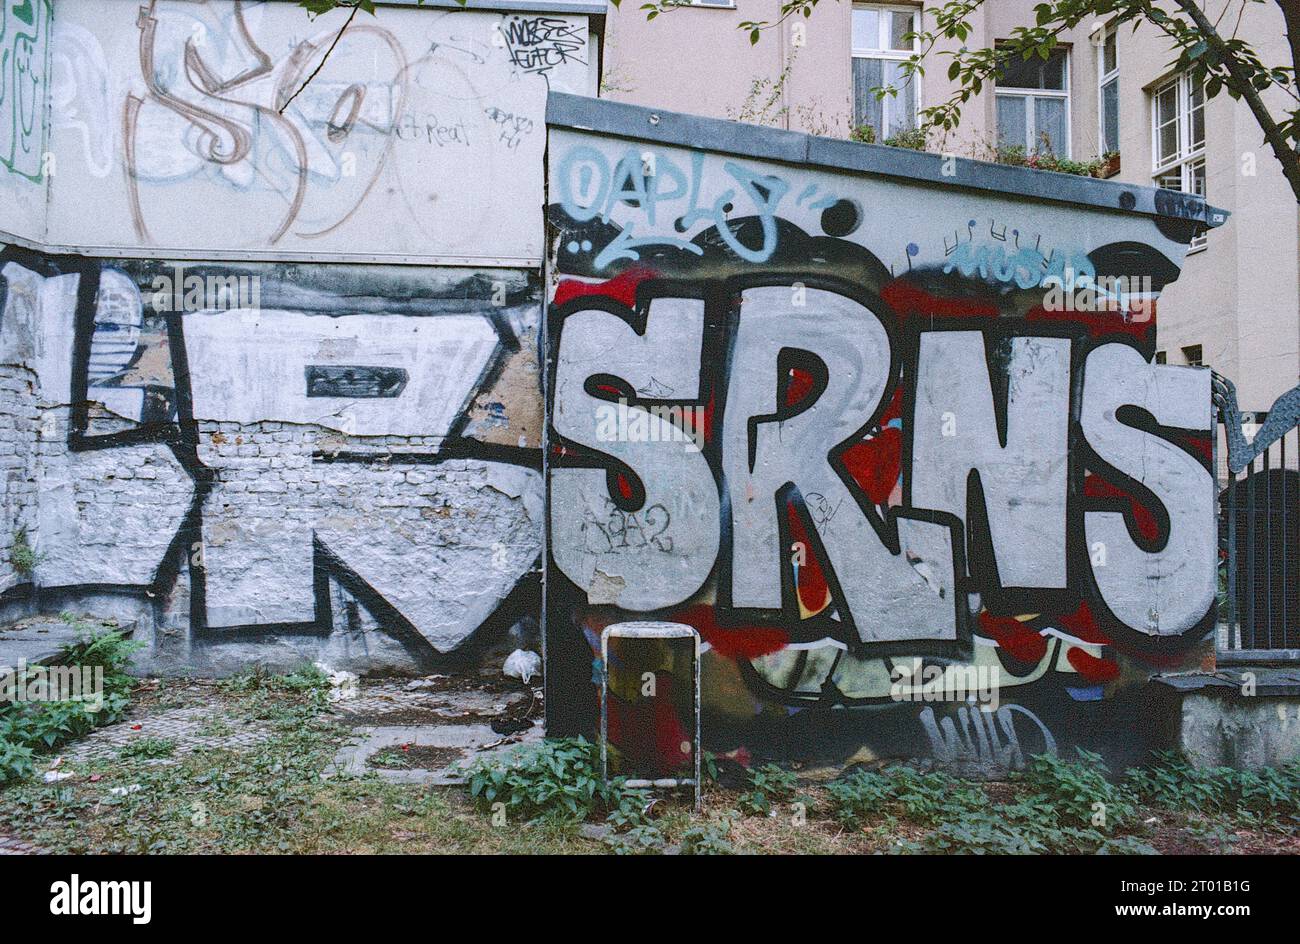 Urban Graffiti in Neighbourhood, to send a message and to decorate otherwise boring, blind walls. Berlin, Germany. Image shot on Analog, Old Stock Kodak Film. Stock Photo